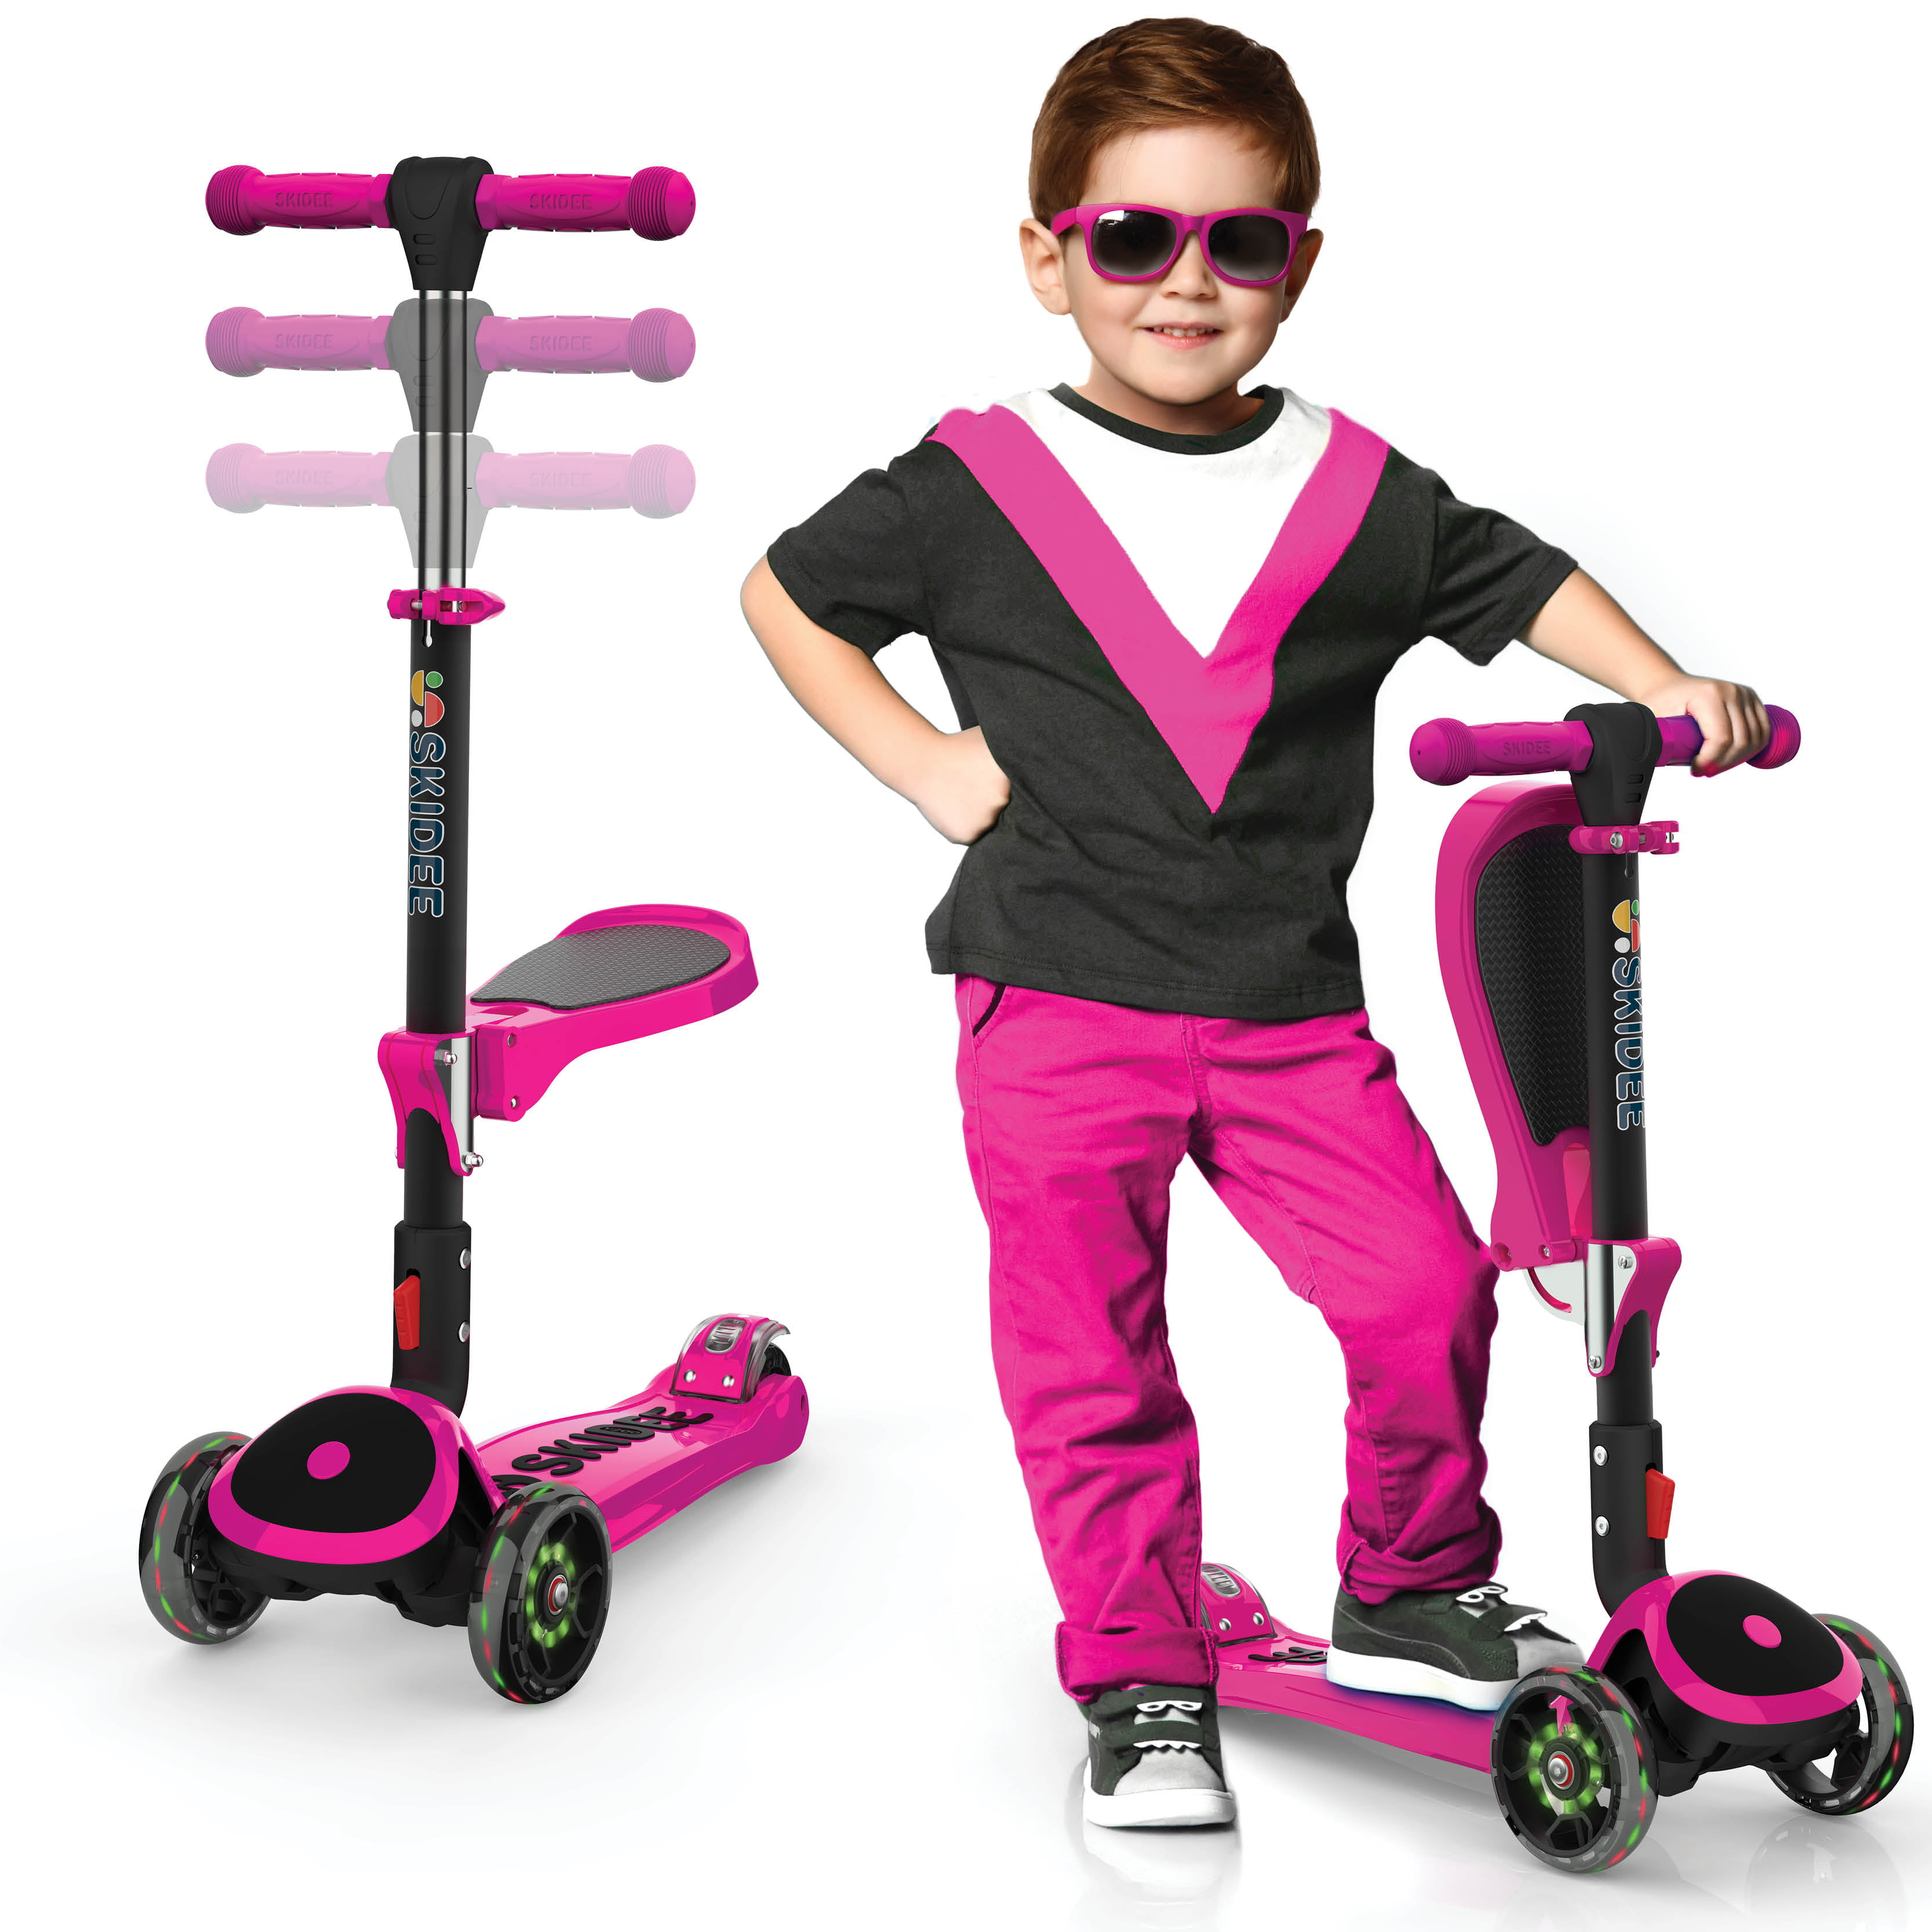 Alorero 3 Wheel Kick Scooter for Kids Toddler Kids Scooter with Led Light up... 